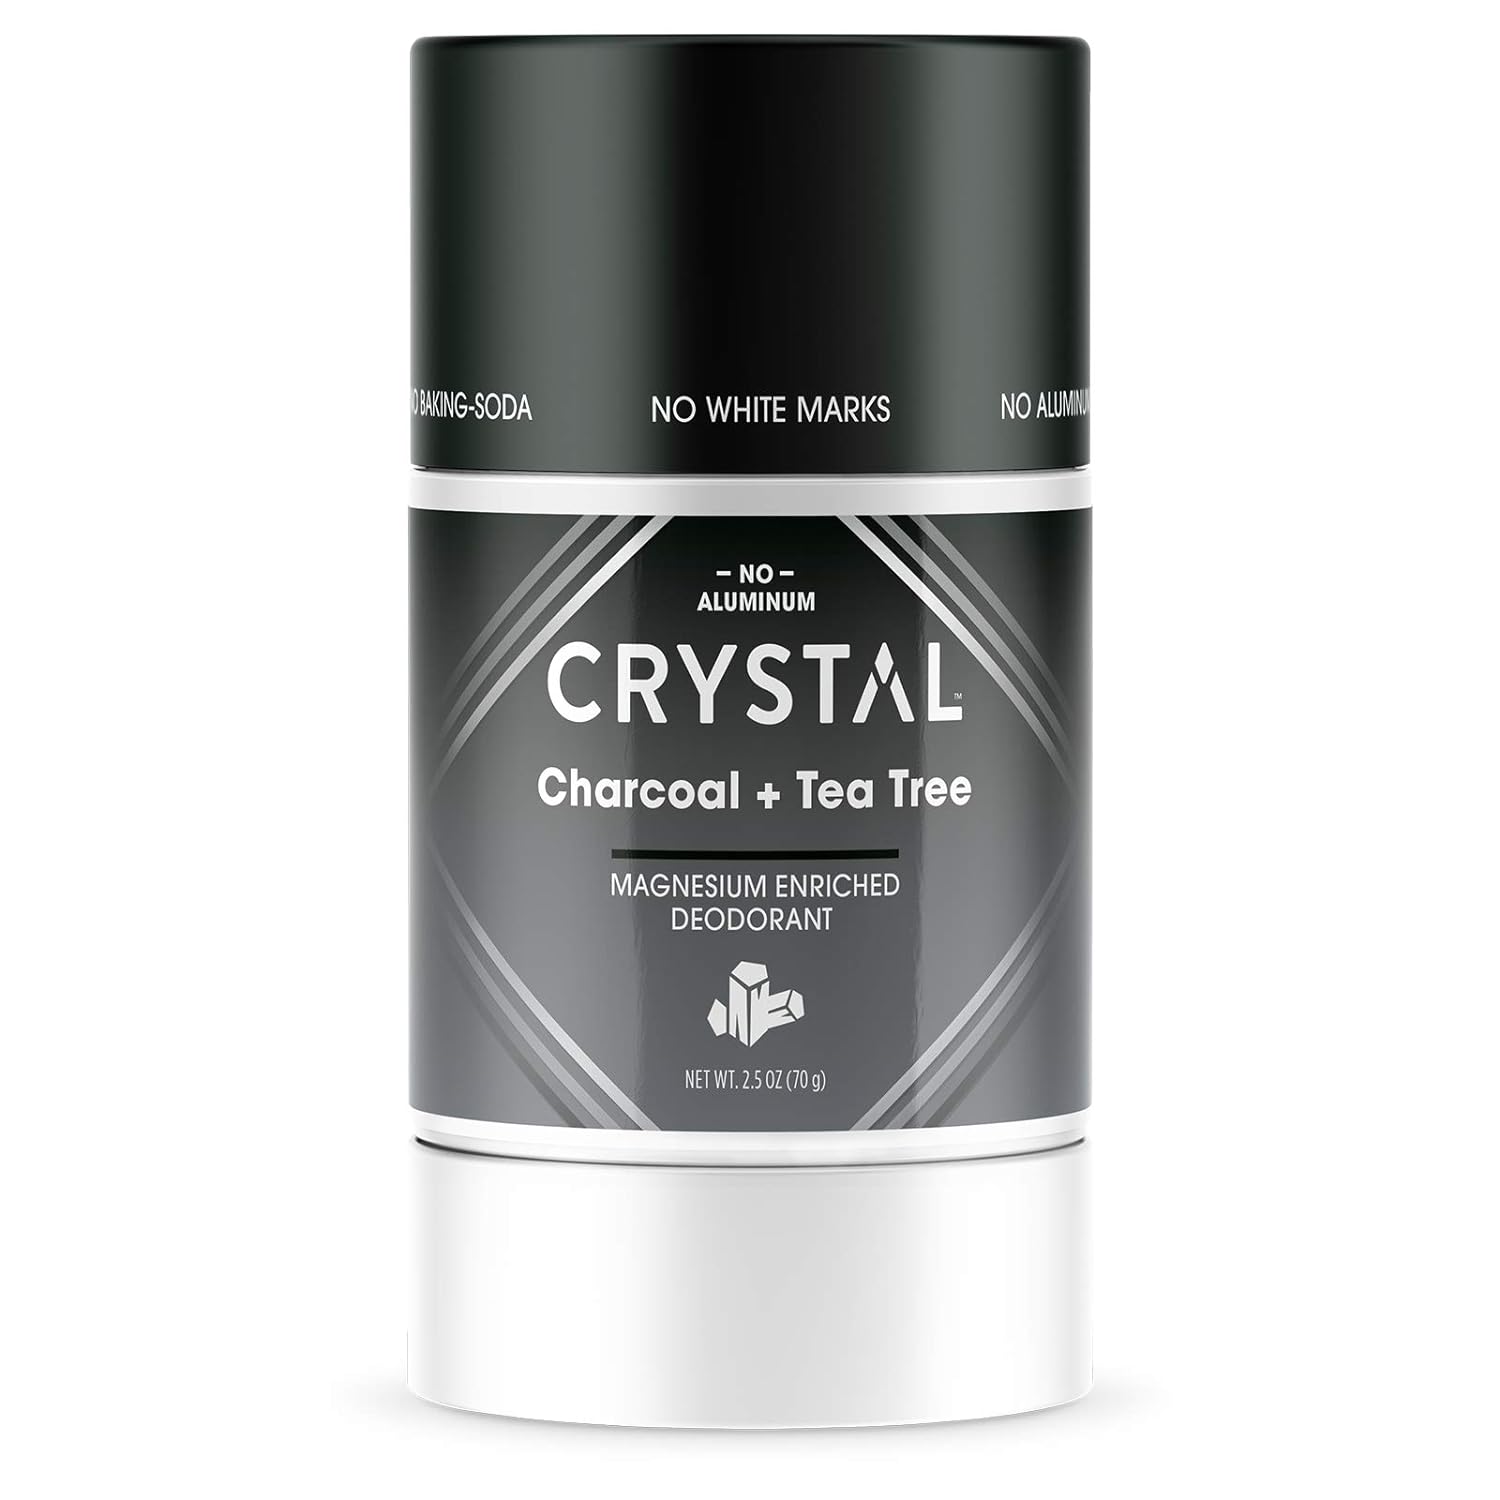 Crystal Magnesium Solid Stick Natural Deodorant, Non-Irritating Aluminum Free Deodorant for Men or Women, Safely and Effectively Fights Odor, Baking Soda Free, Charcoal & Tea Tree, 2.5 oz